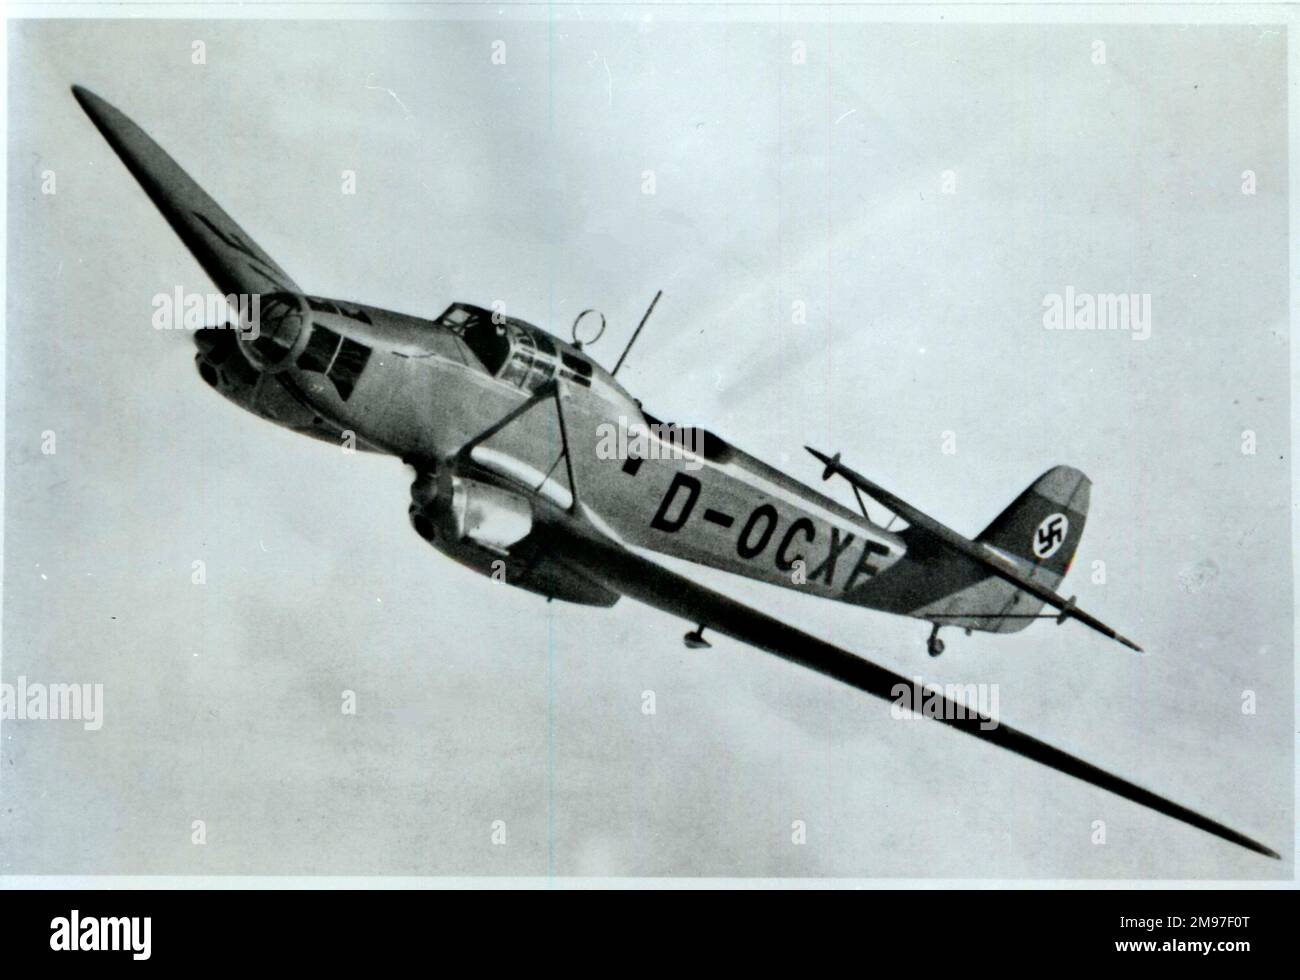 Focke Wulf FW 58C -one of the luftwaffe's standard twin-engined trainers. Stock Photo